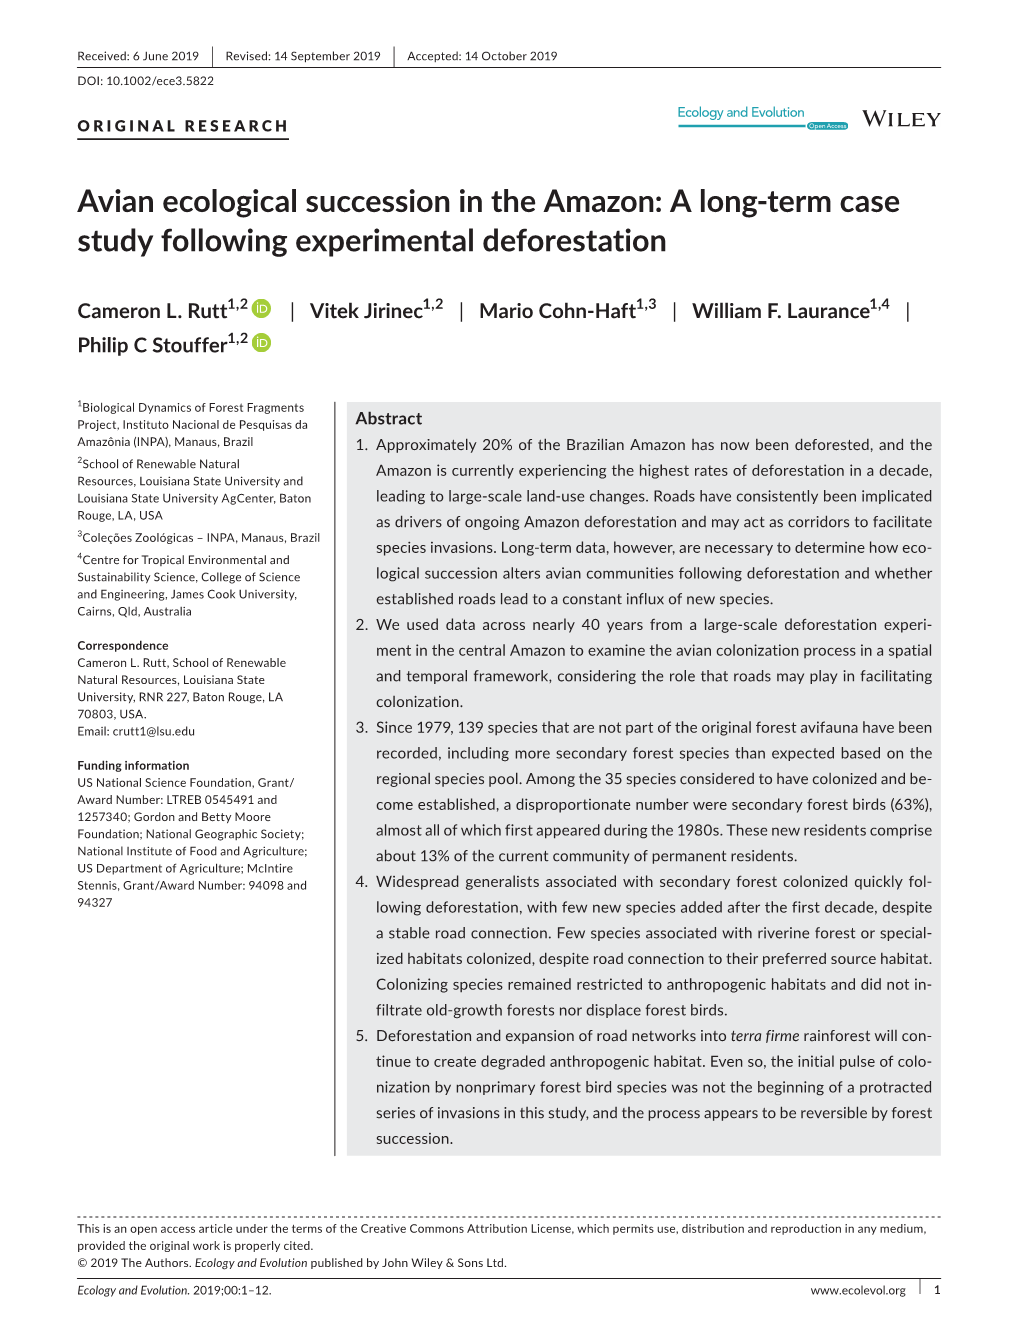 Avian Ecological Succession in the Amazon: a Long‐Term Case Study Following Experimental Deforestation